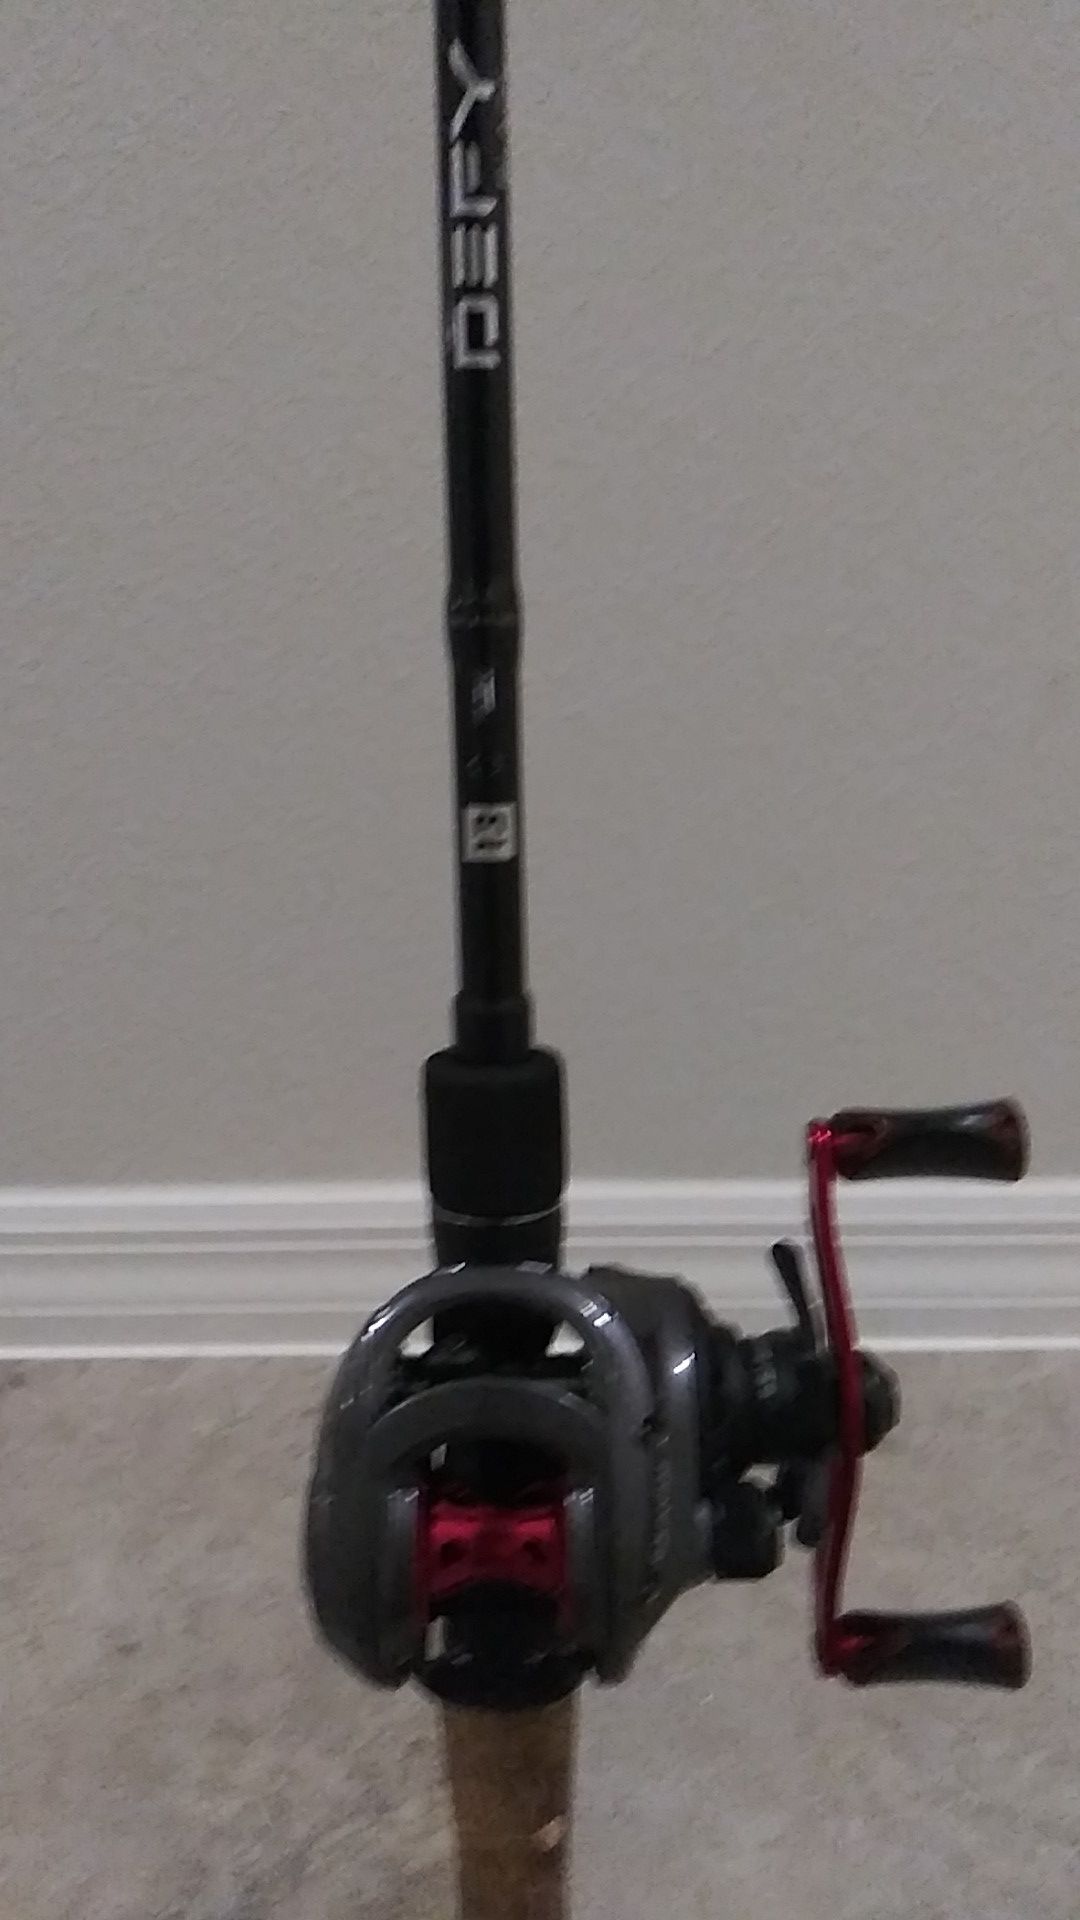 13 Fishing rod/ Brand new never used Quantum Pulse 6.6:1 reel. Rod is in good condition guides are not replace or jacked up.